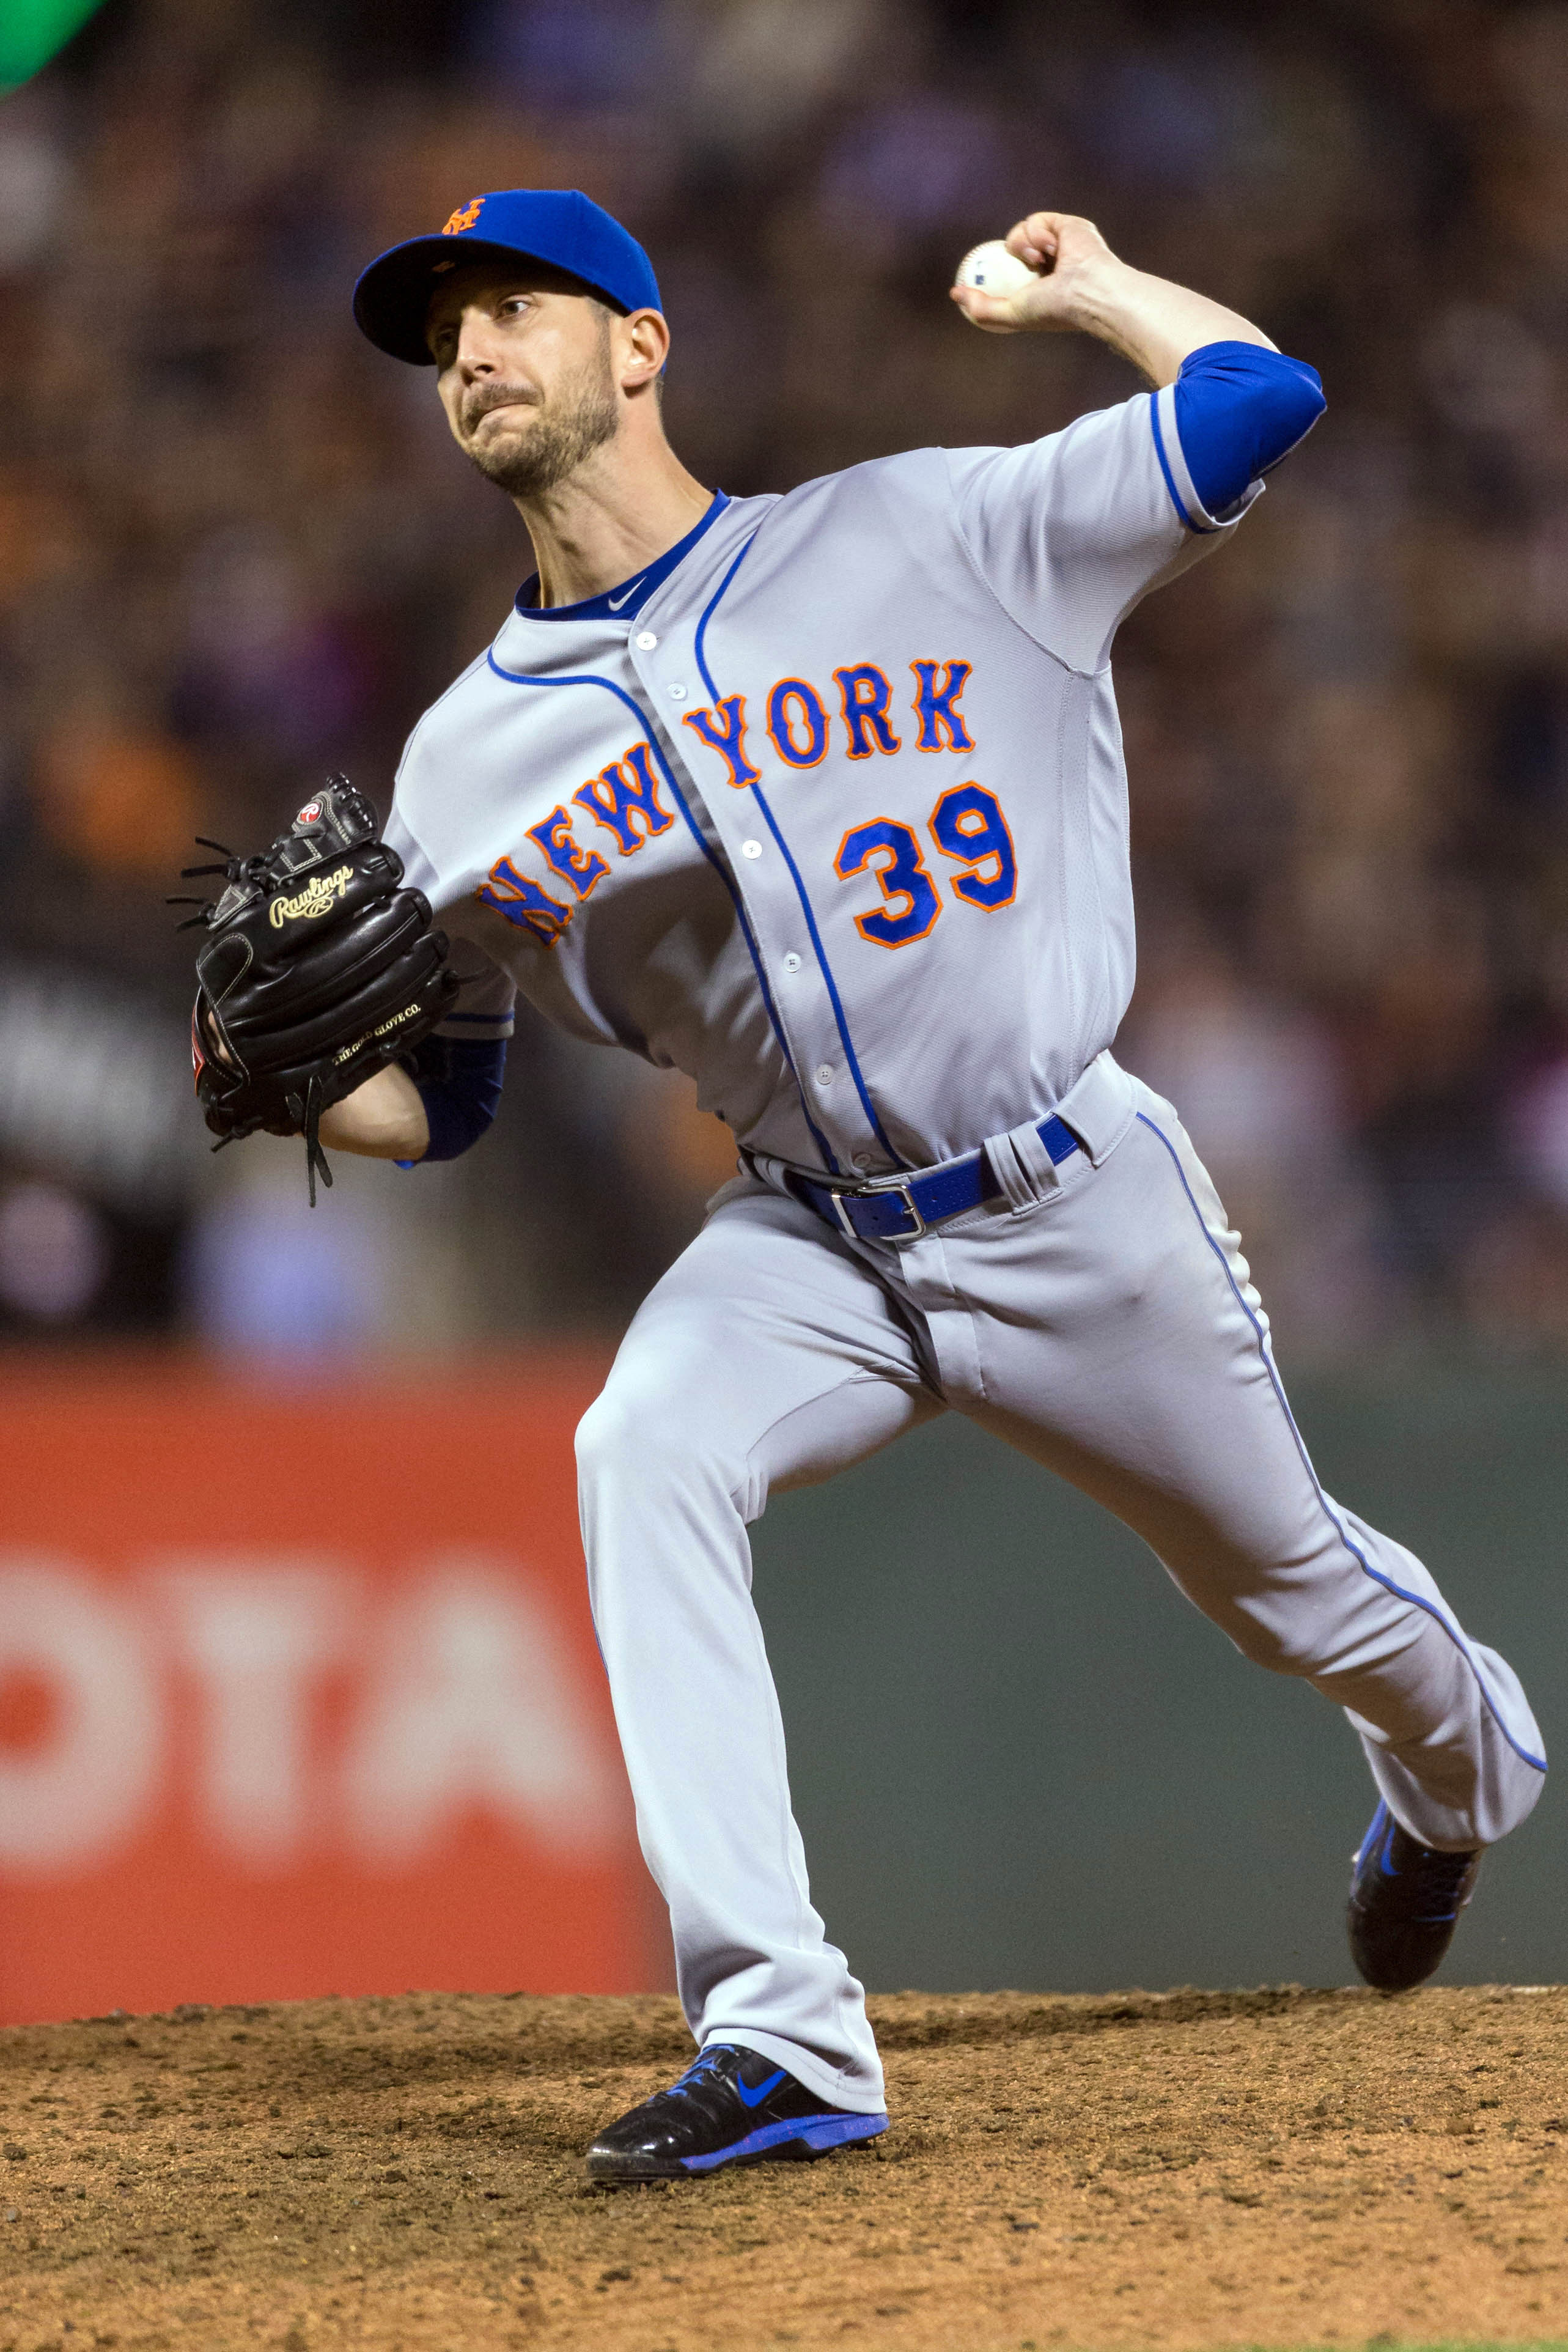 Jerry Blevins' first career start didn't go how anyone was hoping